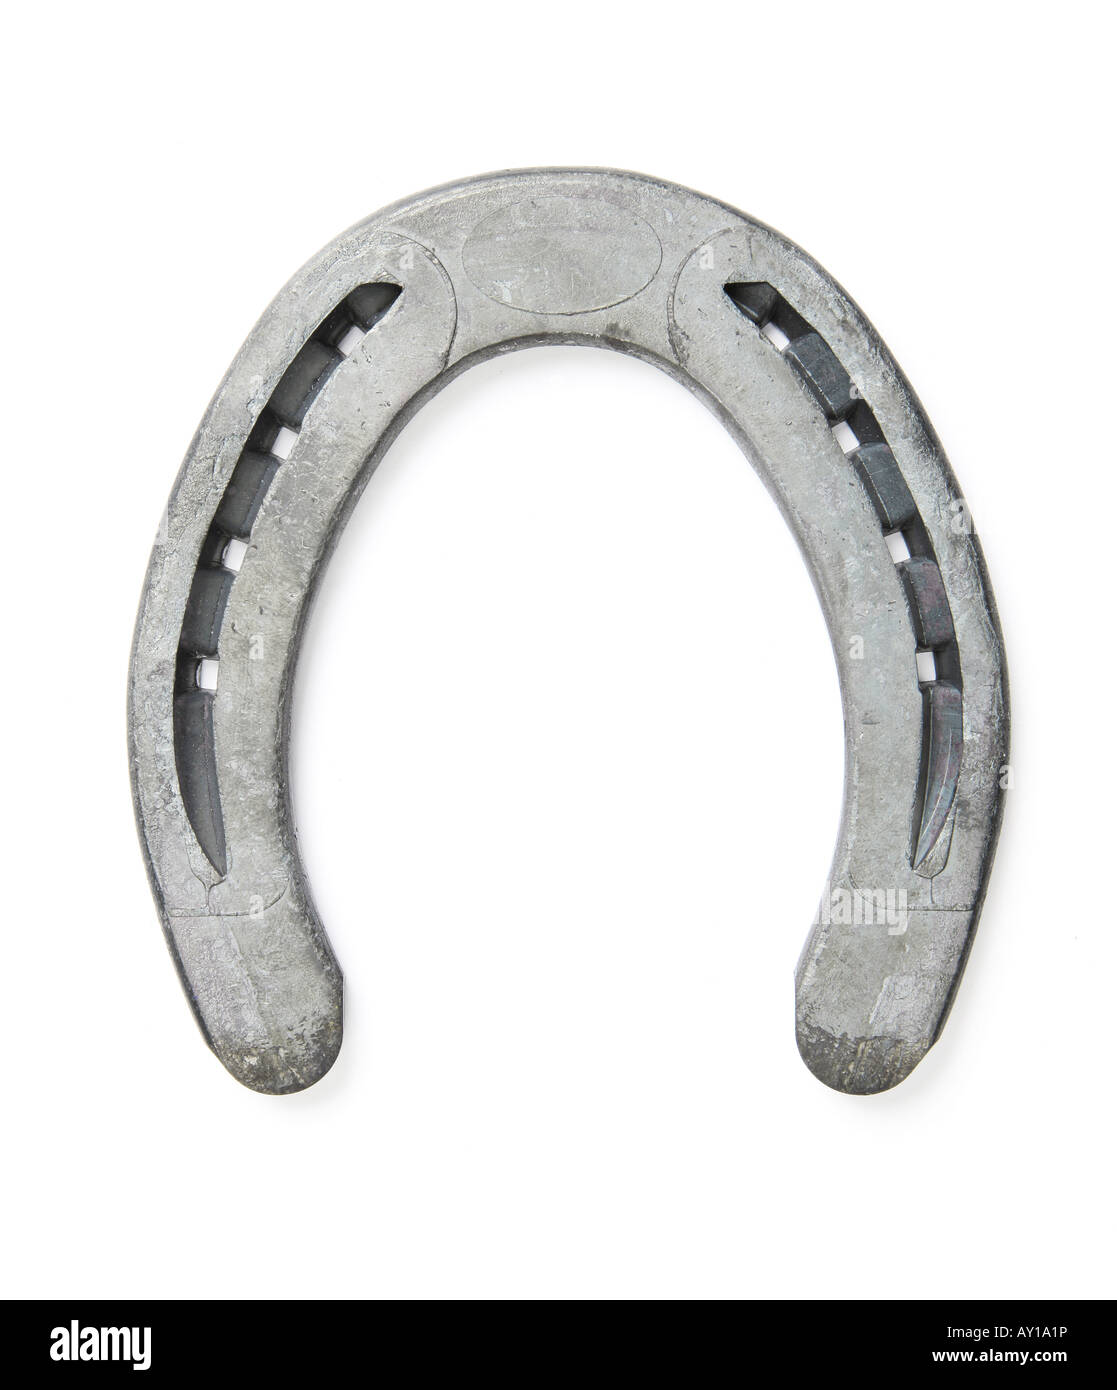 Lucky horseshoe isolated on white background Shot in studio with a 21 1 Megapixel camera Stock Photo